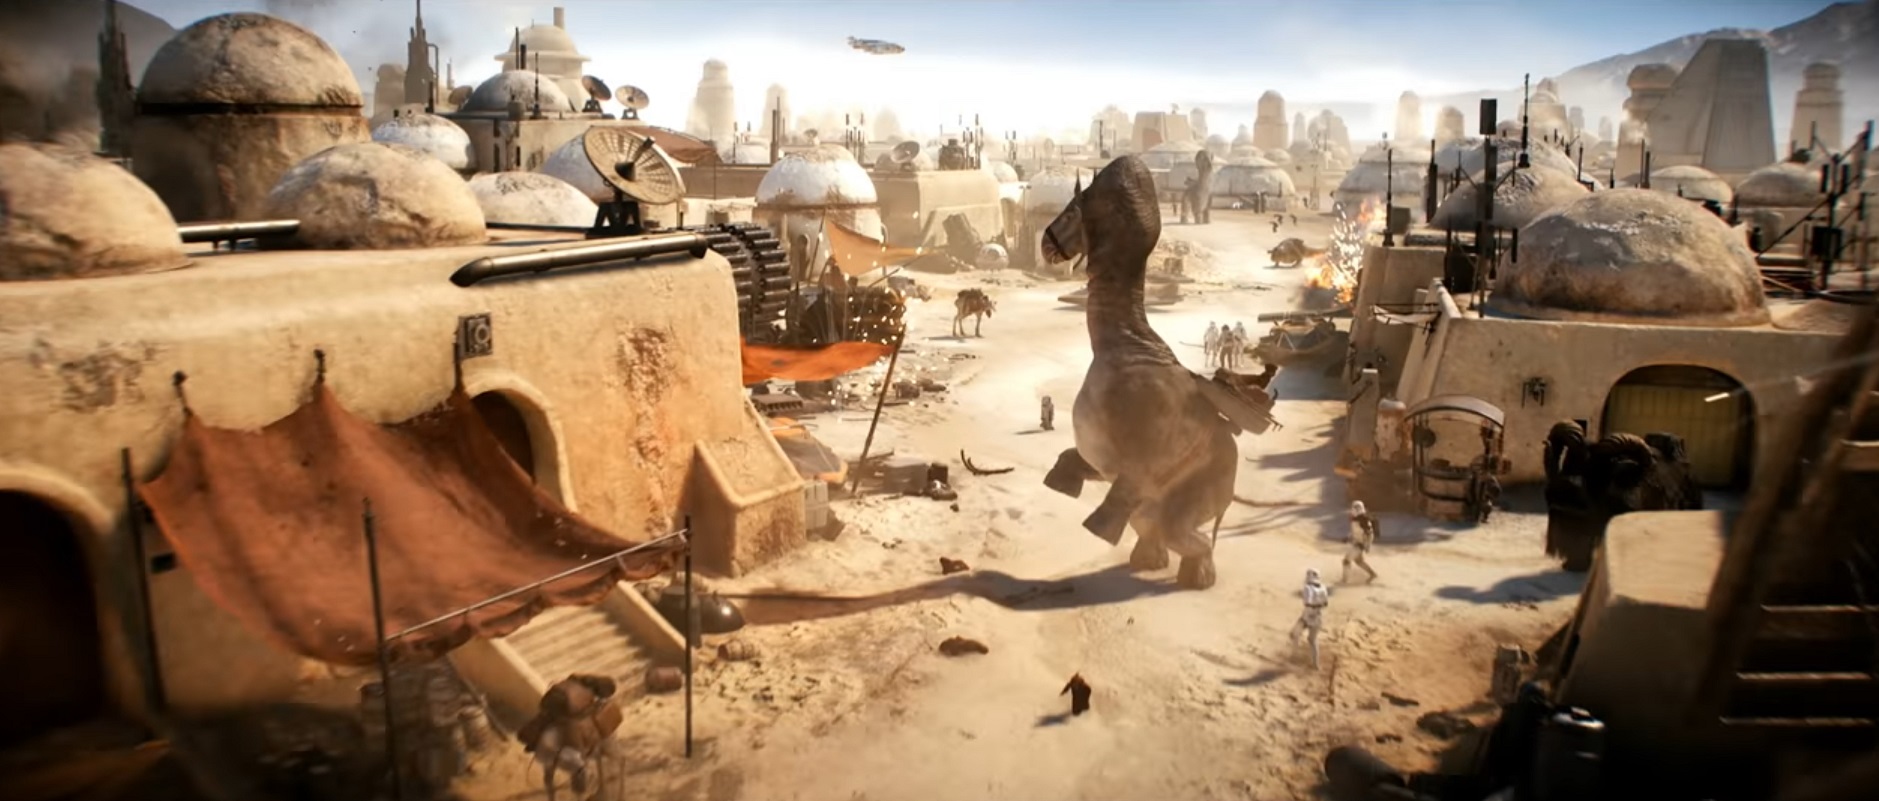 A scene from the Star Wars: Battlefront II trailer